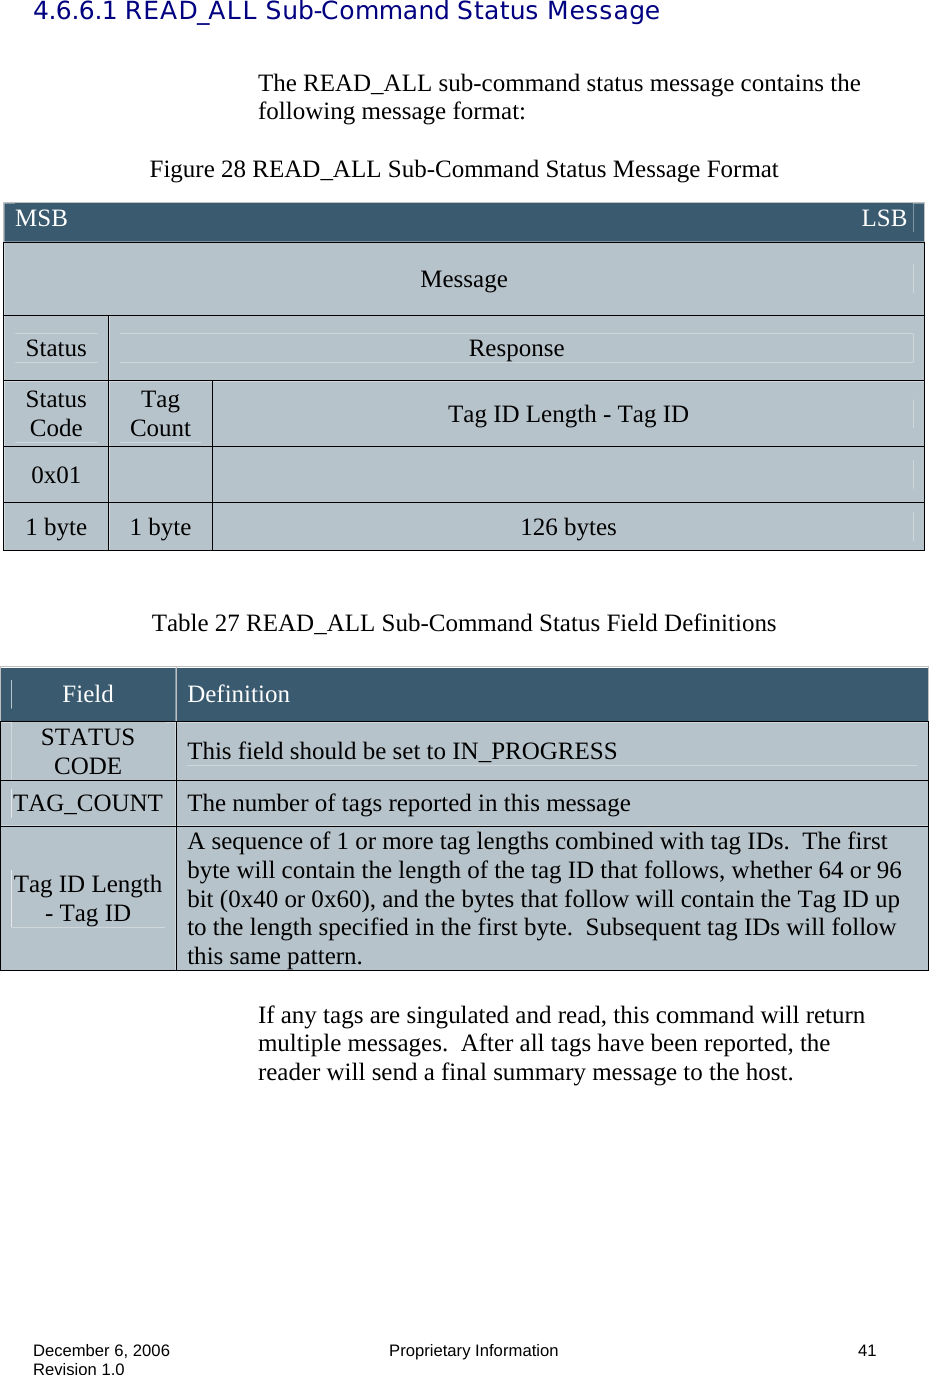  December 6, 2006  Proprietary Information      41 Revision 1.0 4.6.6.1 READ_ALL Sub-Command Status Message    The READ_ALL sub-command status message contains the following message format:  Figure 28 READ_ALL Sub-Command Status Message Format   Table 27 READ_ALL Sub-Command Status Field Definitions  Field  Definition STATUS CODE  This field should be set to IN_PROGRESS TAG_COUNT  The number of tags reported in this message Tag ID Length - Tag ID A sequence of 1 or more tag lengths combined with tag IDs.  The first byte will contain the length of the tag ID that follows, whether 64 or 96 bit (0x40 or 0x60), and the bytes that follow will contain the Tag ID up to the length specified in the first byte.  Subsequent tag IDs will follow this same pattern.  If any tags are singulated and read, this command will return multiple messages.  After all tags have been reported, the reader will send a final summary message to the host.   MSB                                                                                                                               LSB Message Status  Response Status Code  Tag Count  Tag ID Length - Tag ID 0x01     1 byte  1 byte  126 bytes 